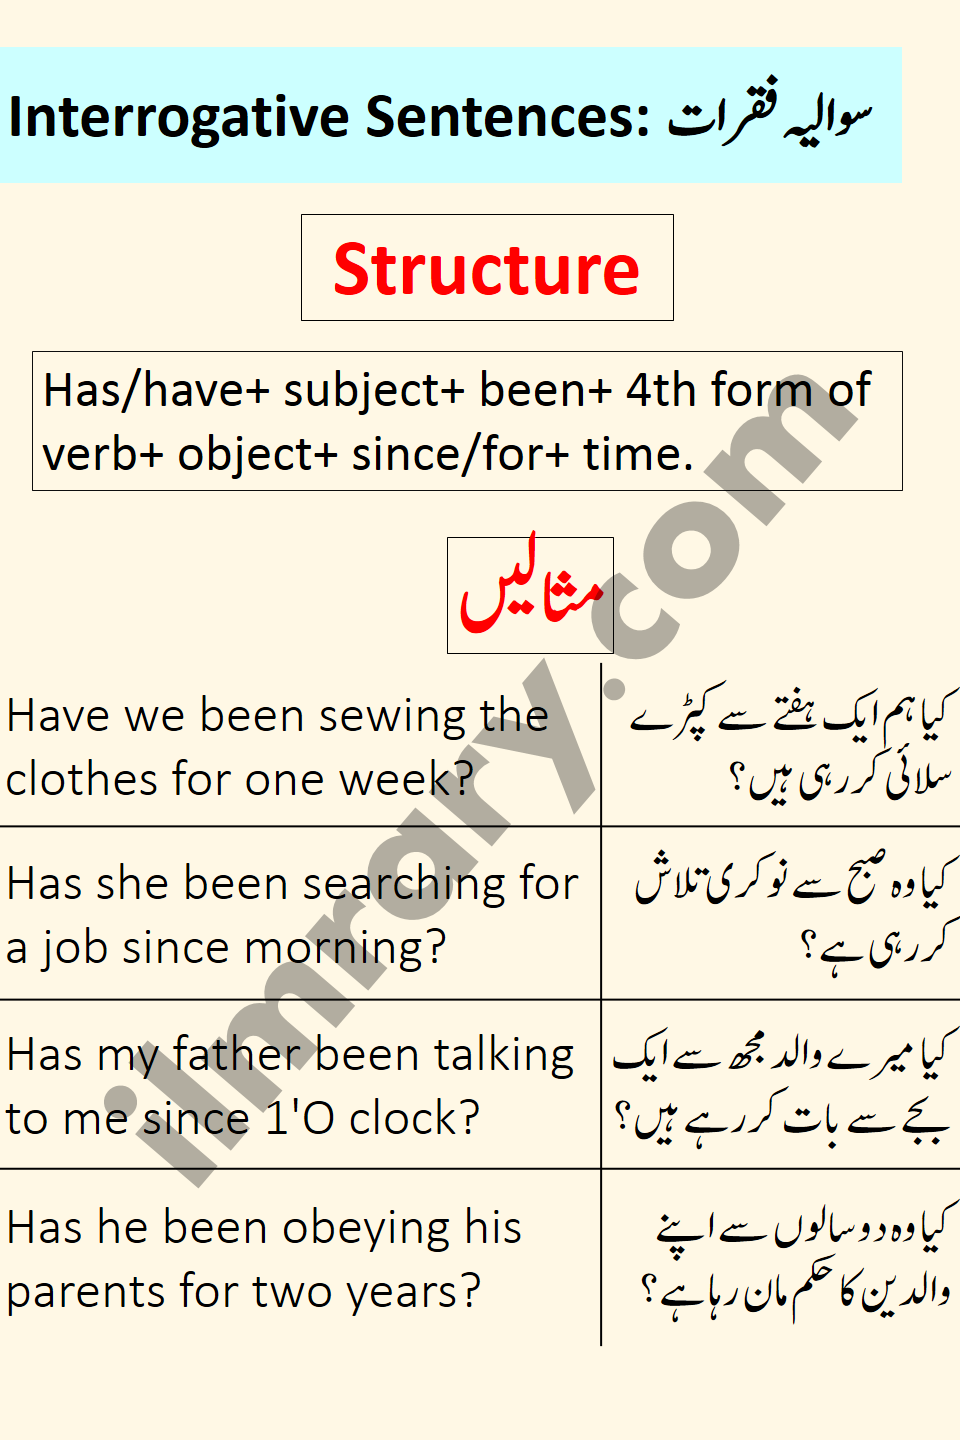 Interrogative Examples for Present Perfect Continuous Tense in Urdu